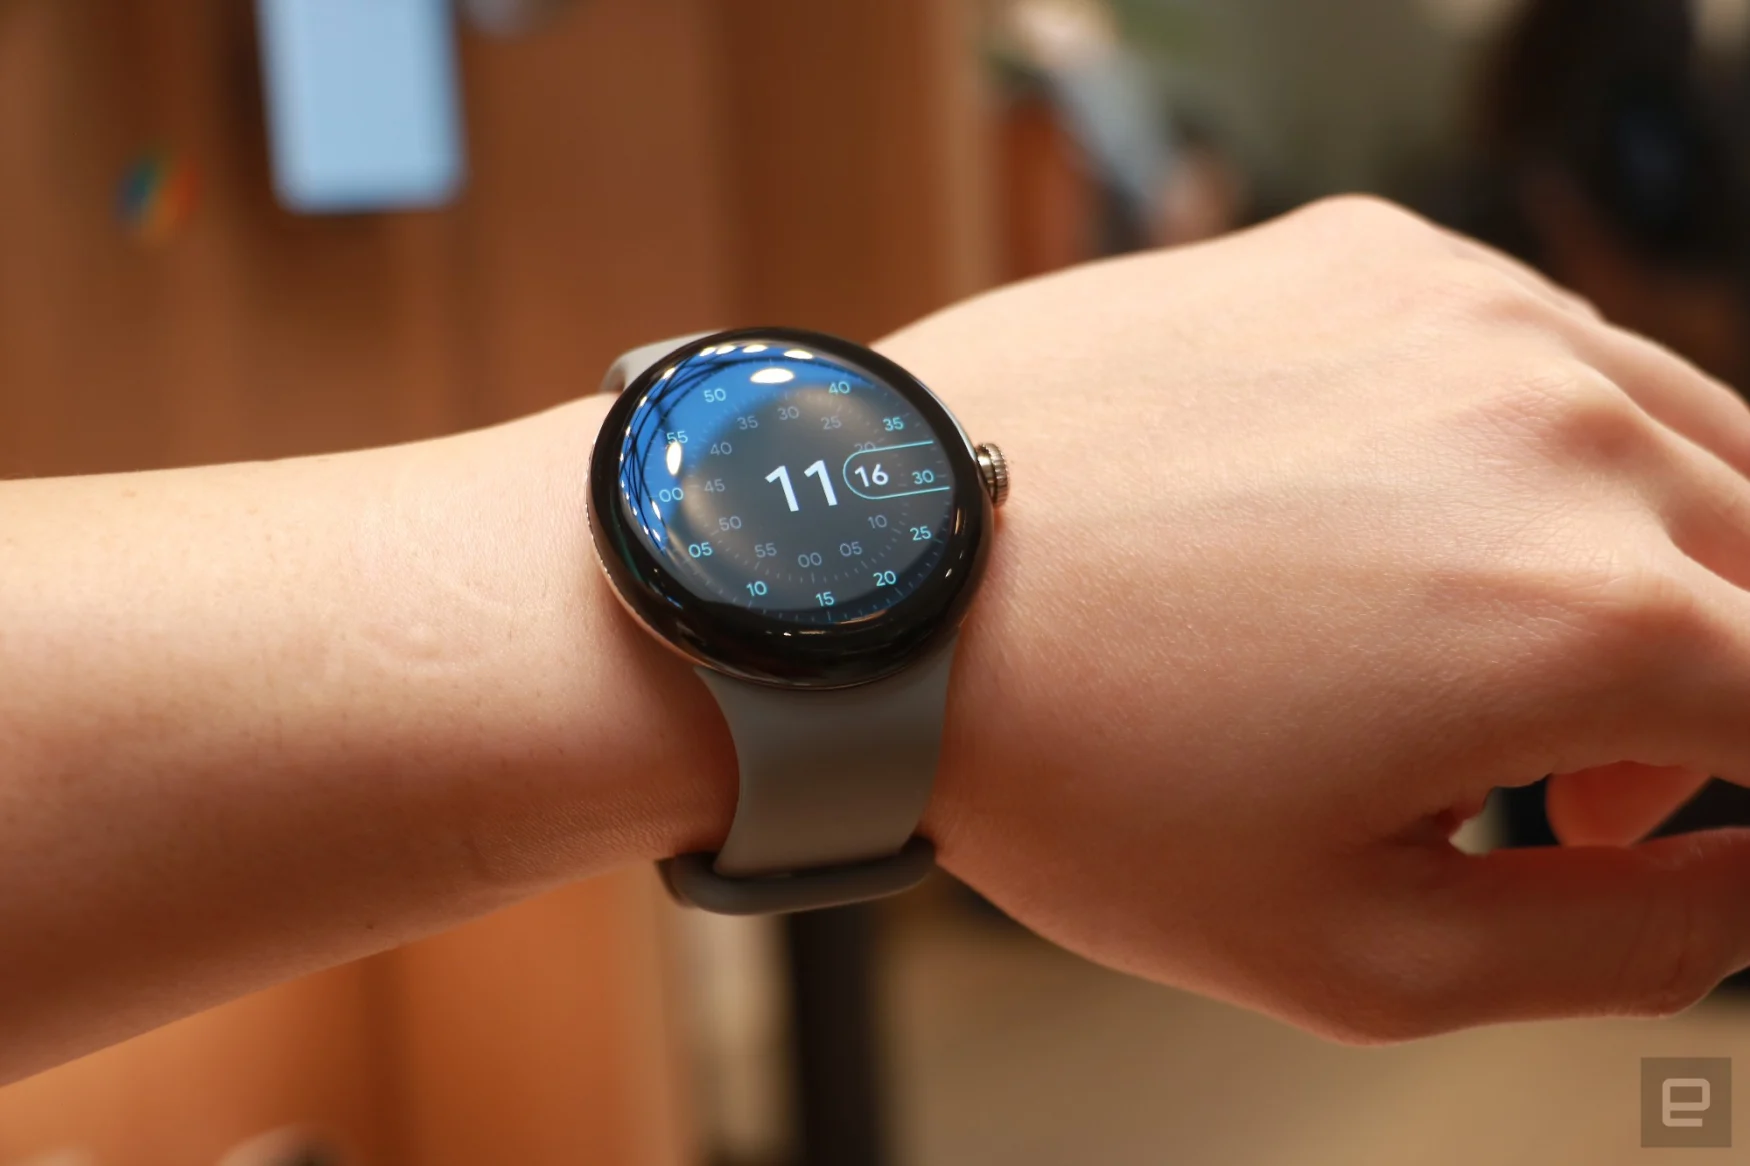 The Pixel Watch with a silicon band on a person's wrist.